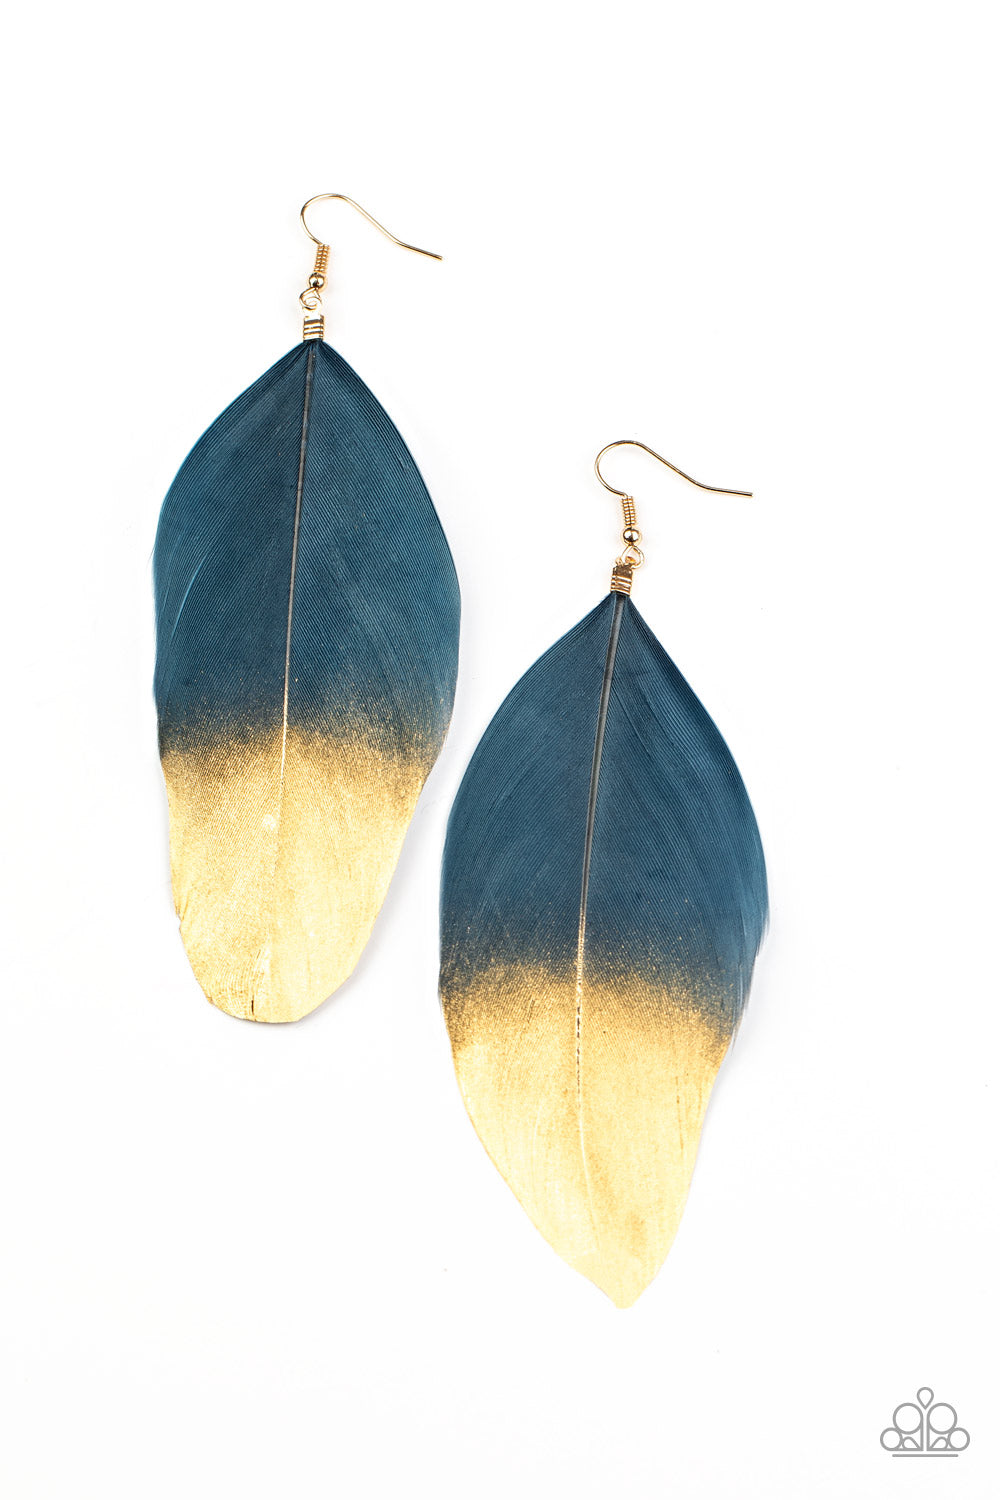 &lt;P&gt;Dipped in a golden shimmer, a soft blue feather fans from the ear in a statement-making fashion. Earring attaches to a standard fishhook fitting.&lt;/P&gt;  

&lt;P&gt; &lt;I&gt;  Sold as one pair of earrings. &lt;/I&gt;  &lt;/P&gt;


&lt;img src=\&quot;https://d9b54x484lq62.cloudfront.net/paparazzi/shopping/images/517_tag150x115_1.png\&quot; alt=\&quot;New Kit\&quot; align=\&quot;middle\&quot; height=\&quot;50\&quot; width=\&quot;50\&quot;/&gt;